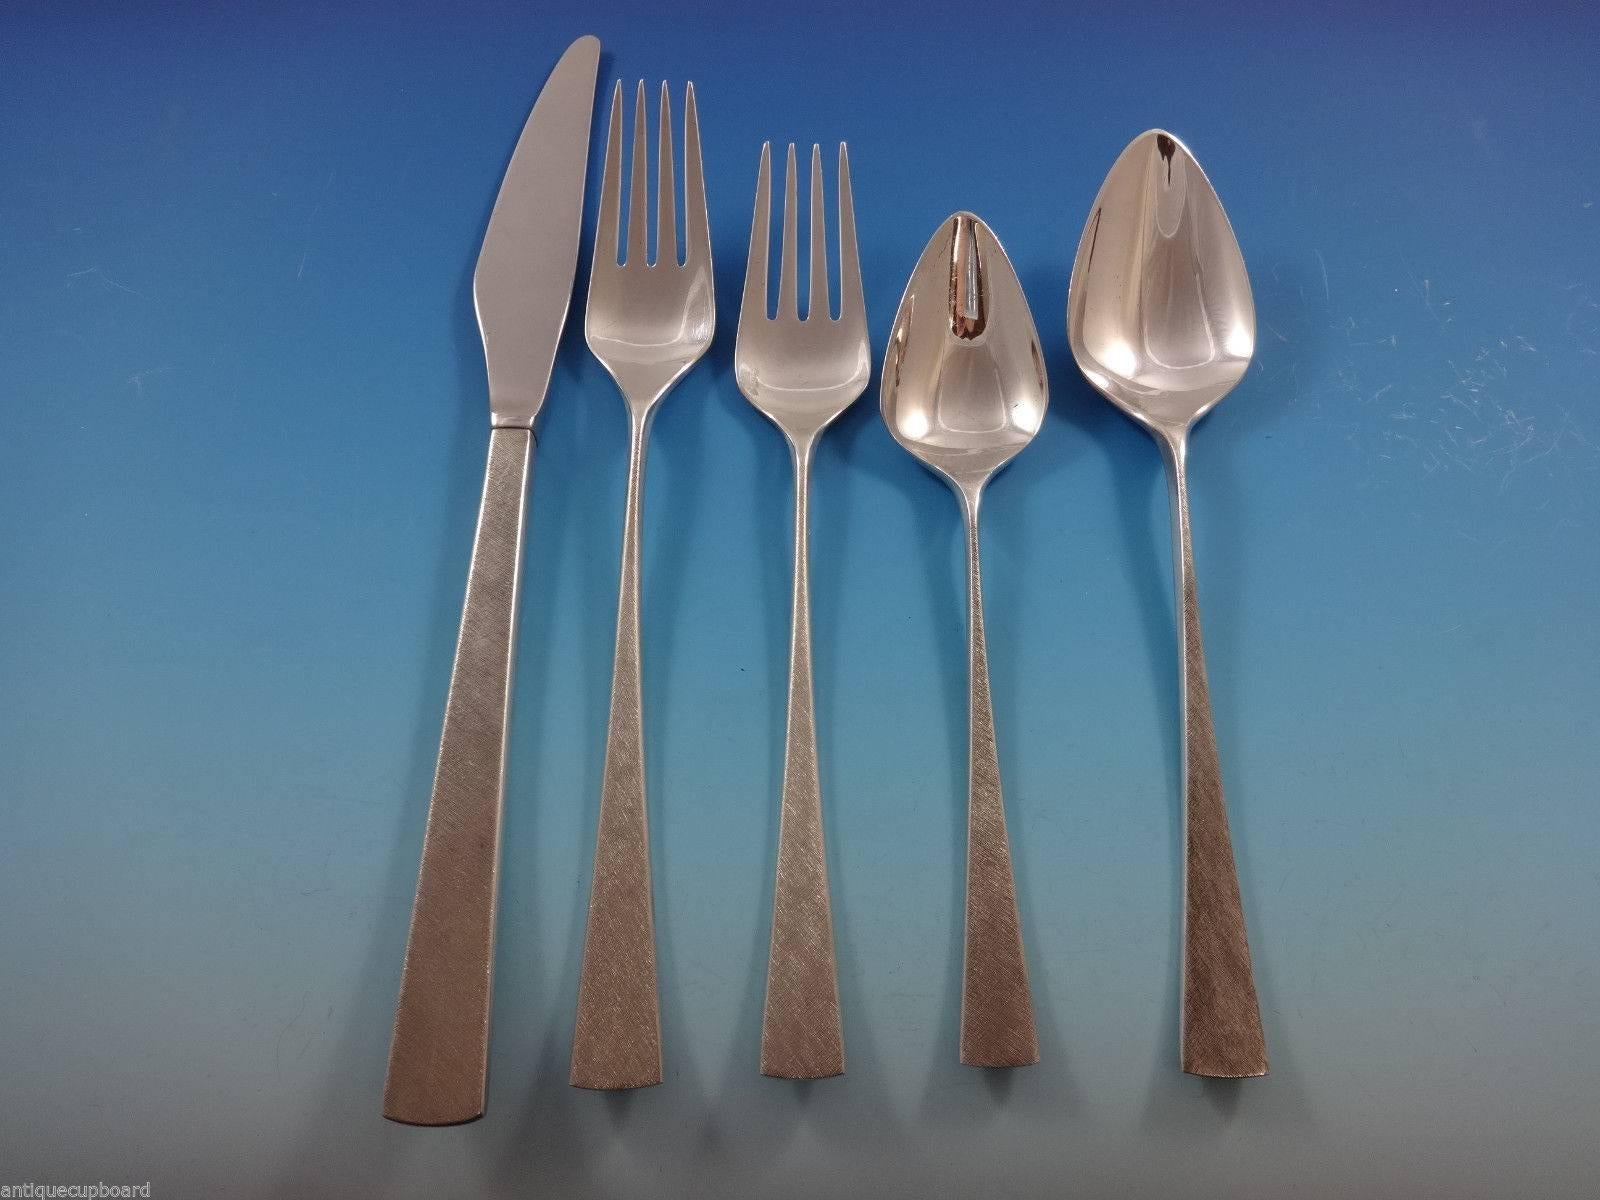 Da Vinci by Reed & Barton sterling silver Mid-Century Modern flatware set - 20 pieces. Great starter set! This set includes:

Four knives, 9 1/8